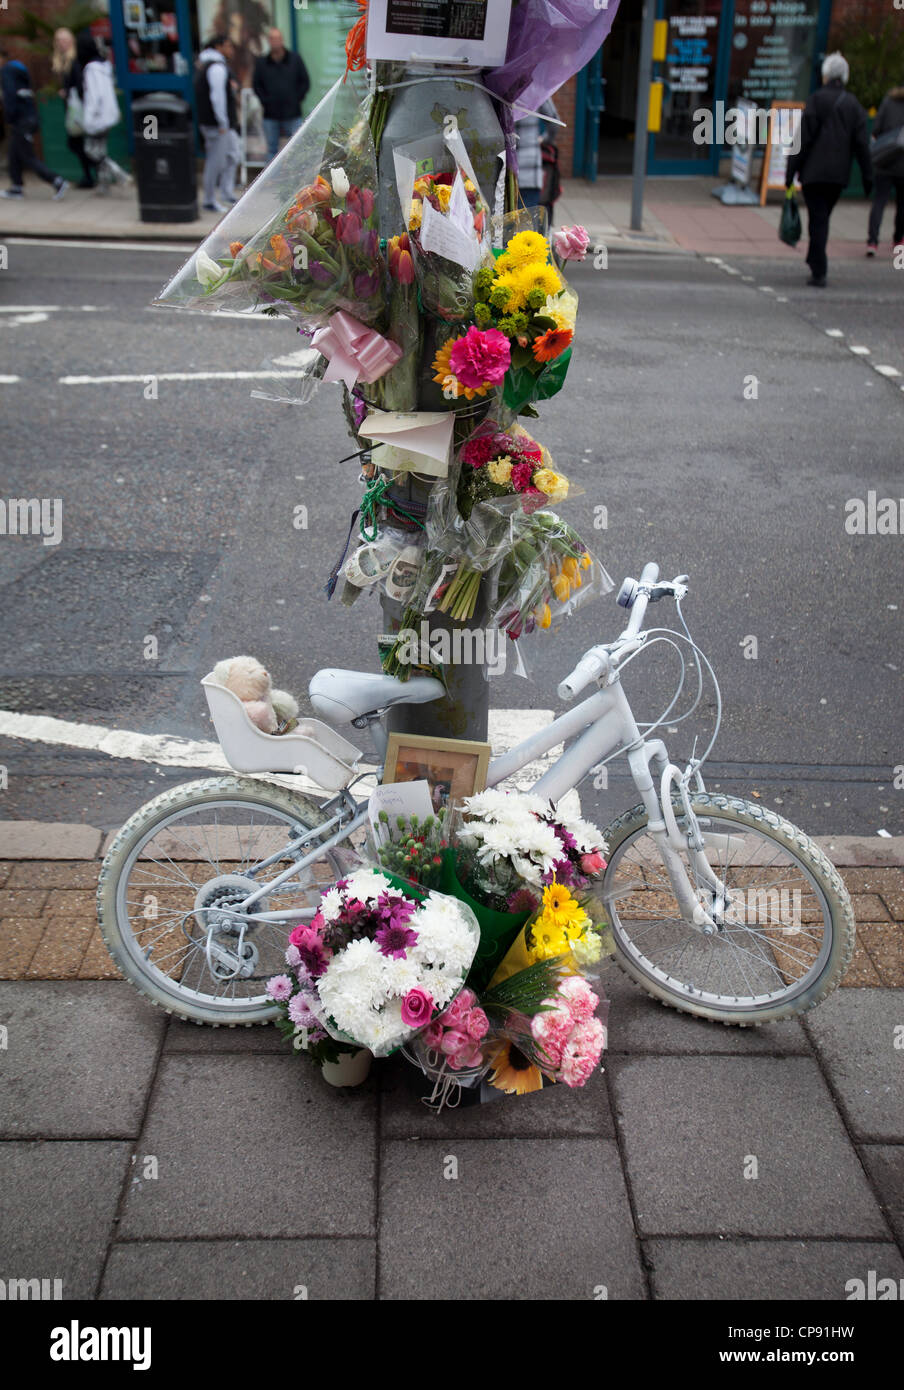 A roadside tribute to a road accident victim in Birmingham, UK Stock Photo